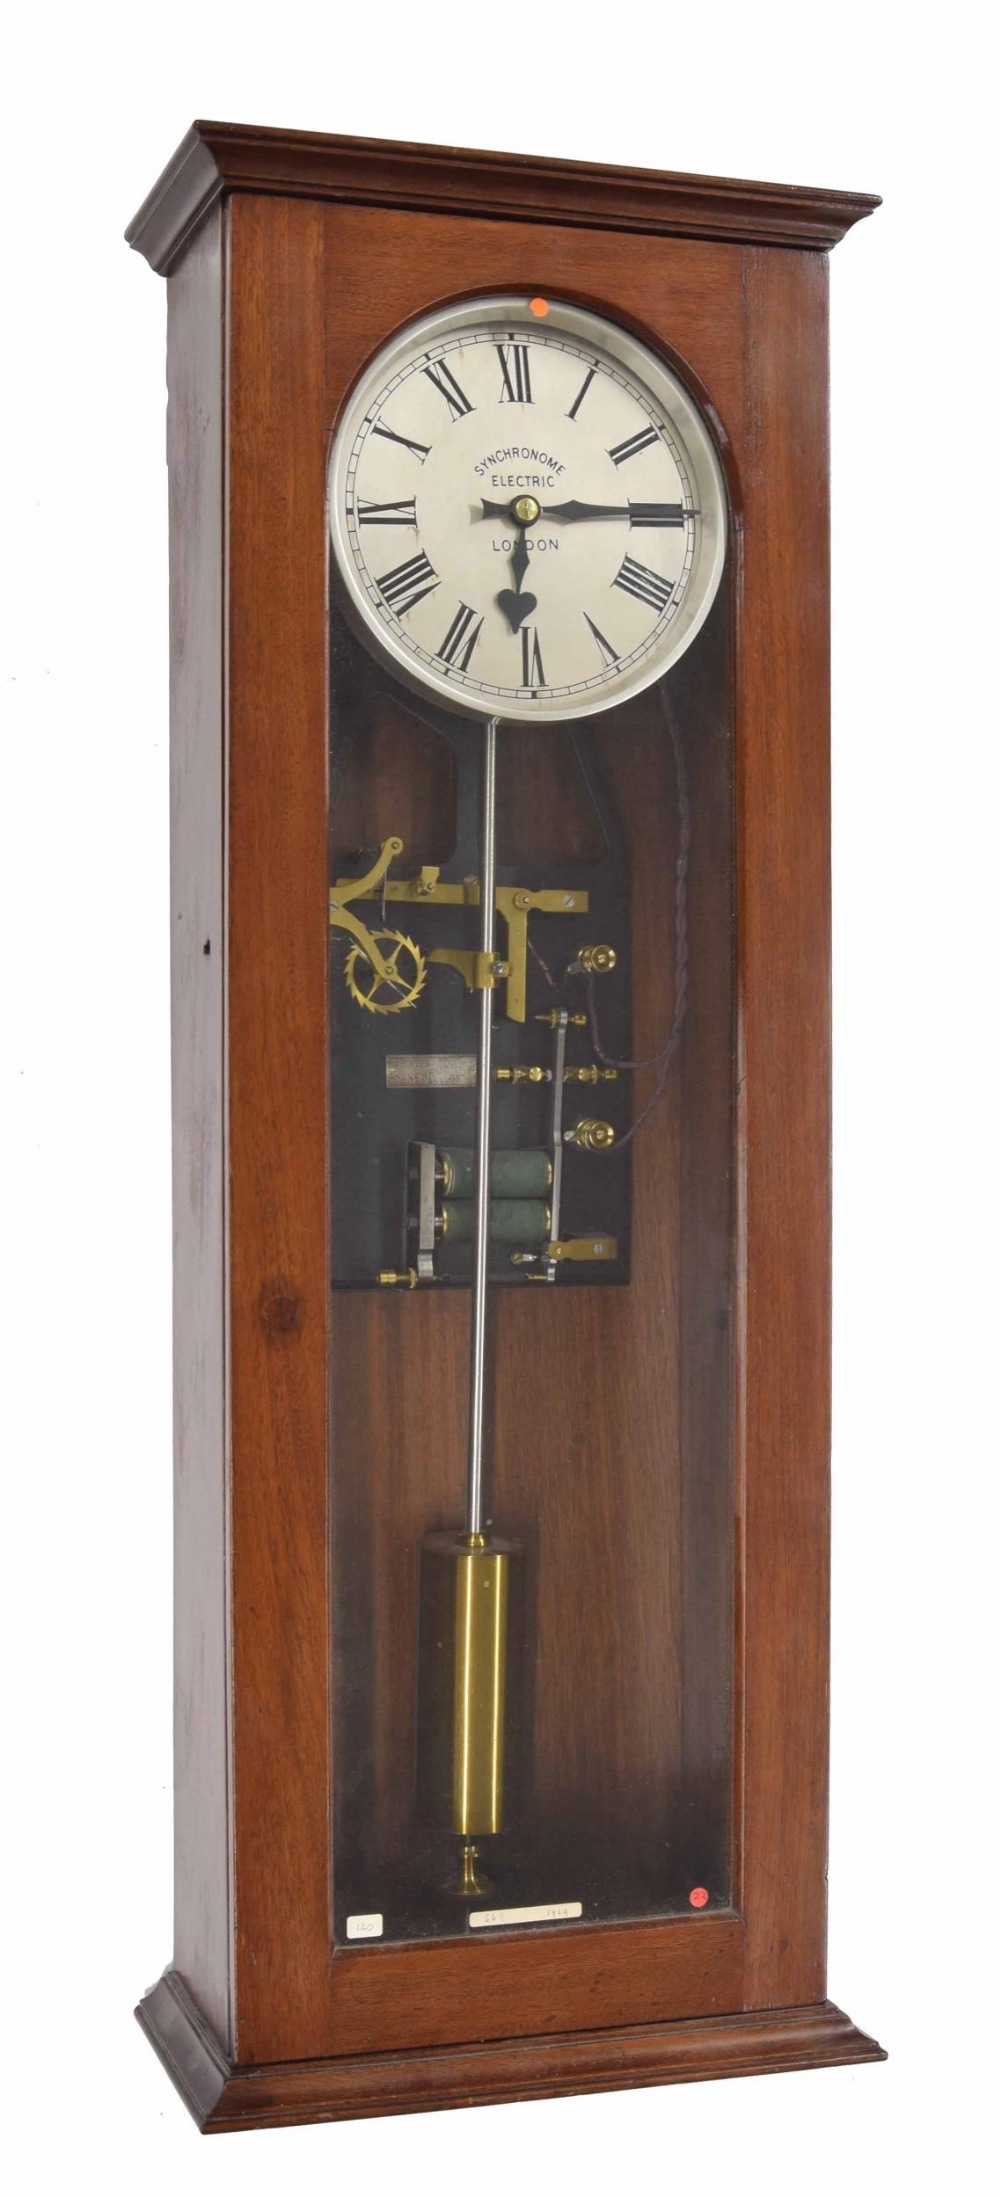 Very rare small Synchronome electric master wall clock circa 1919/1920, 3/4 second with sprung